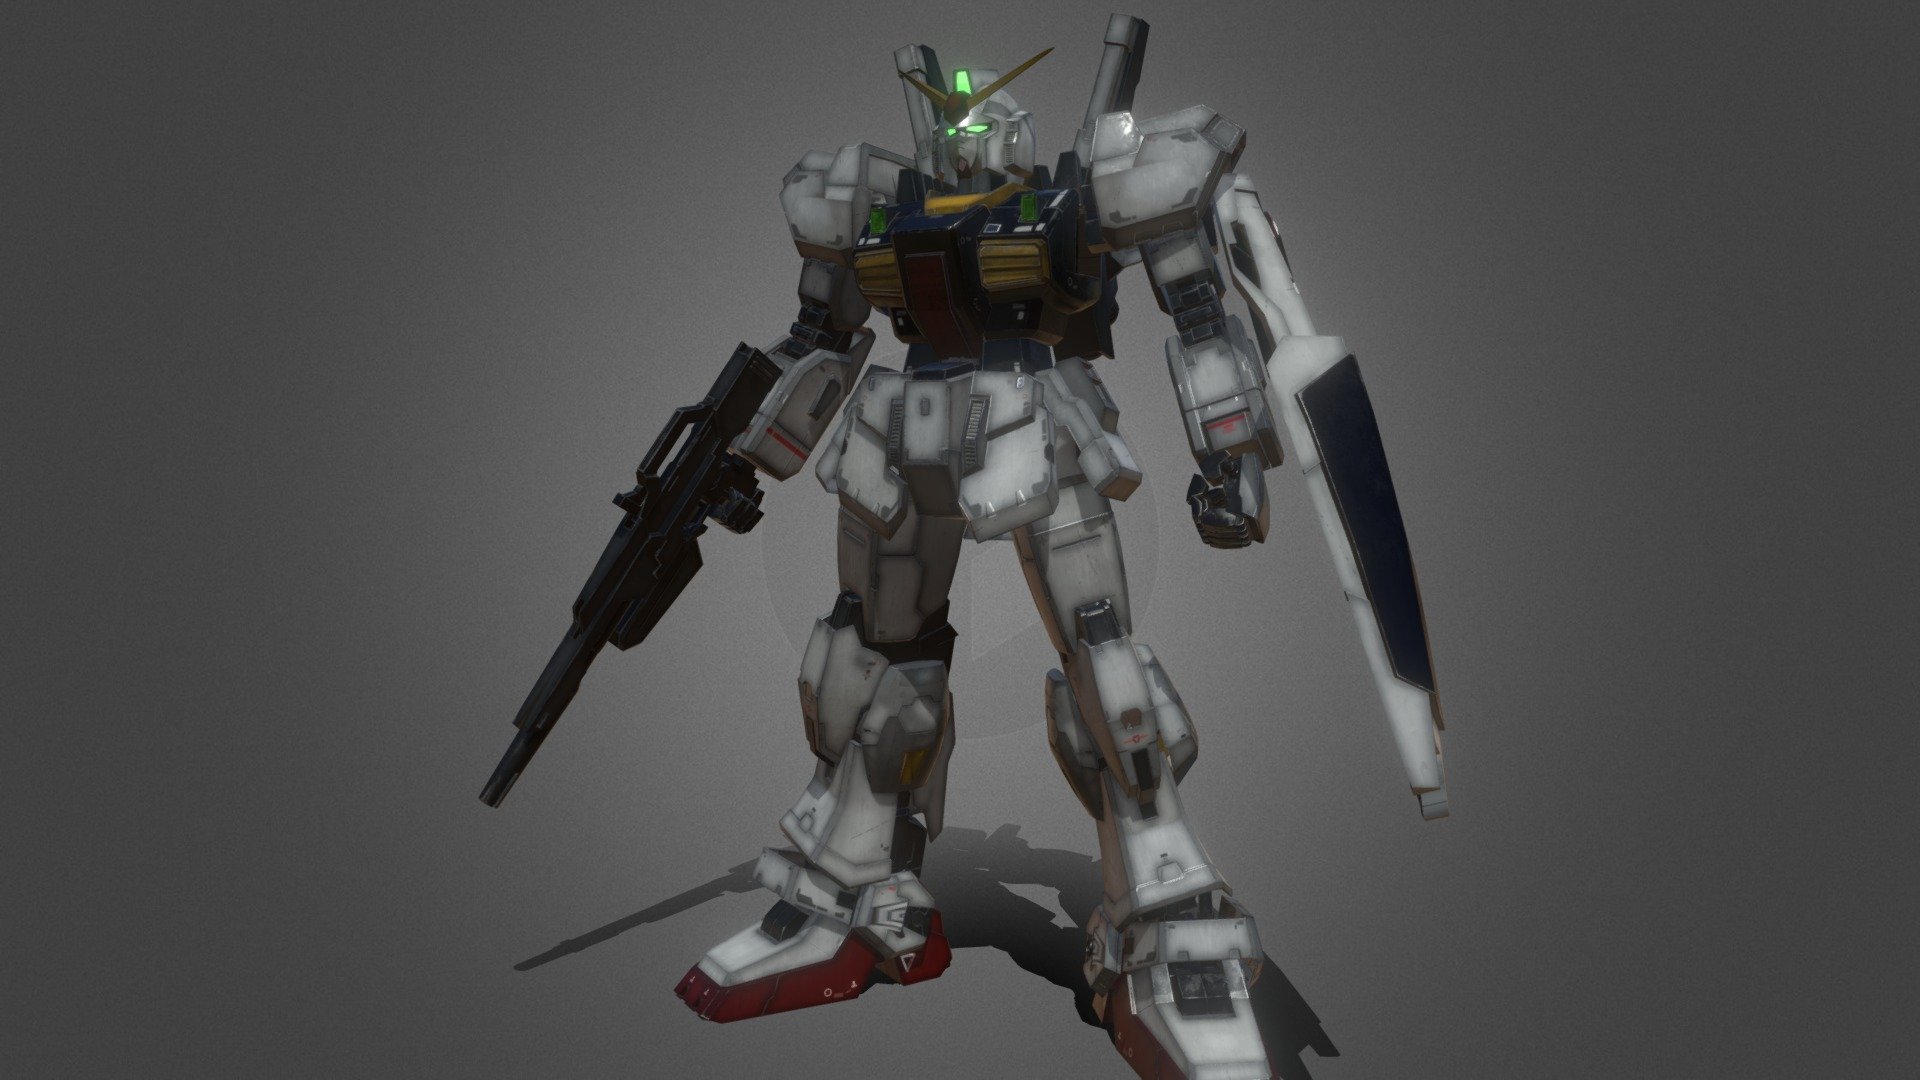 RX-178 GUNDAM MK2 modeled in blender textured in substance painter

KEYWORDS :
game-ready game asset   unrealengine blender maya 3ds max realistic robot mech mechanical hard-surface gundam transformers unreal engine substance painter si-fi character starwars military ガンダム　ゼータガンダム　機動戦士ガンダム - (ROBOT) Gundam mk2 with realistic texture - Buy Royalty Free 3D model by godzilla213213 3d model